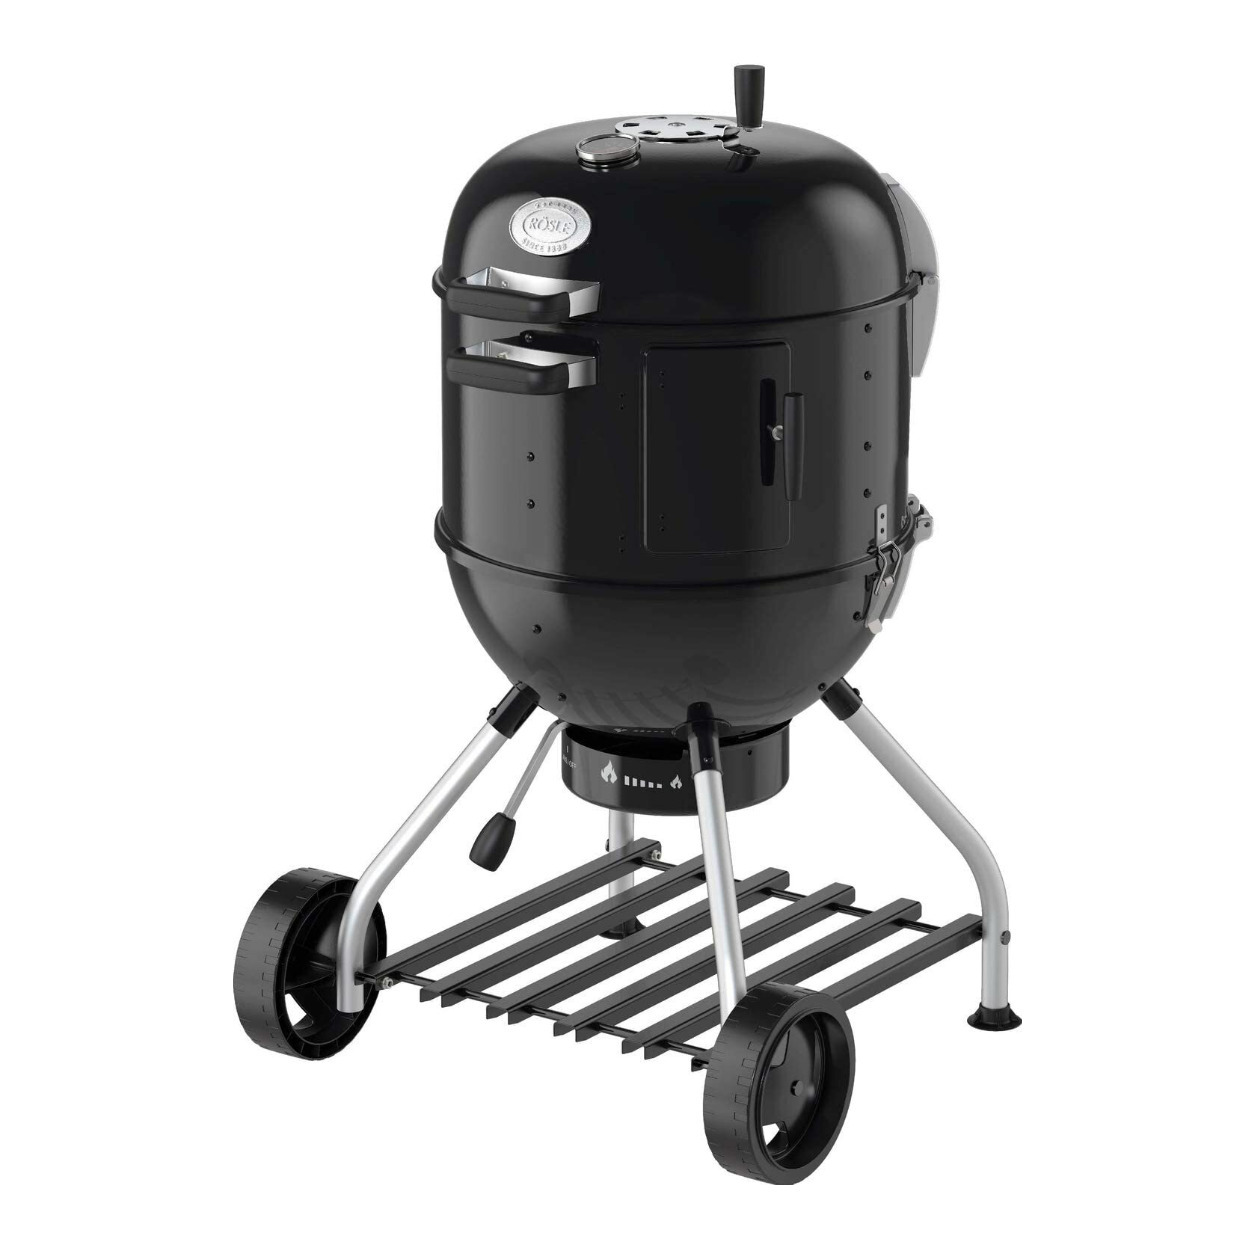 Rosle Charcoal Smoker No.1 F50-S convertible, Multi Grill, Barbecue, Smoker, Tailgater, camping, steamer - image 4 of 9